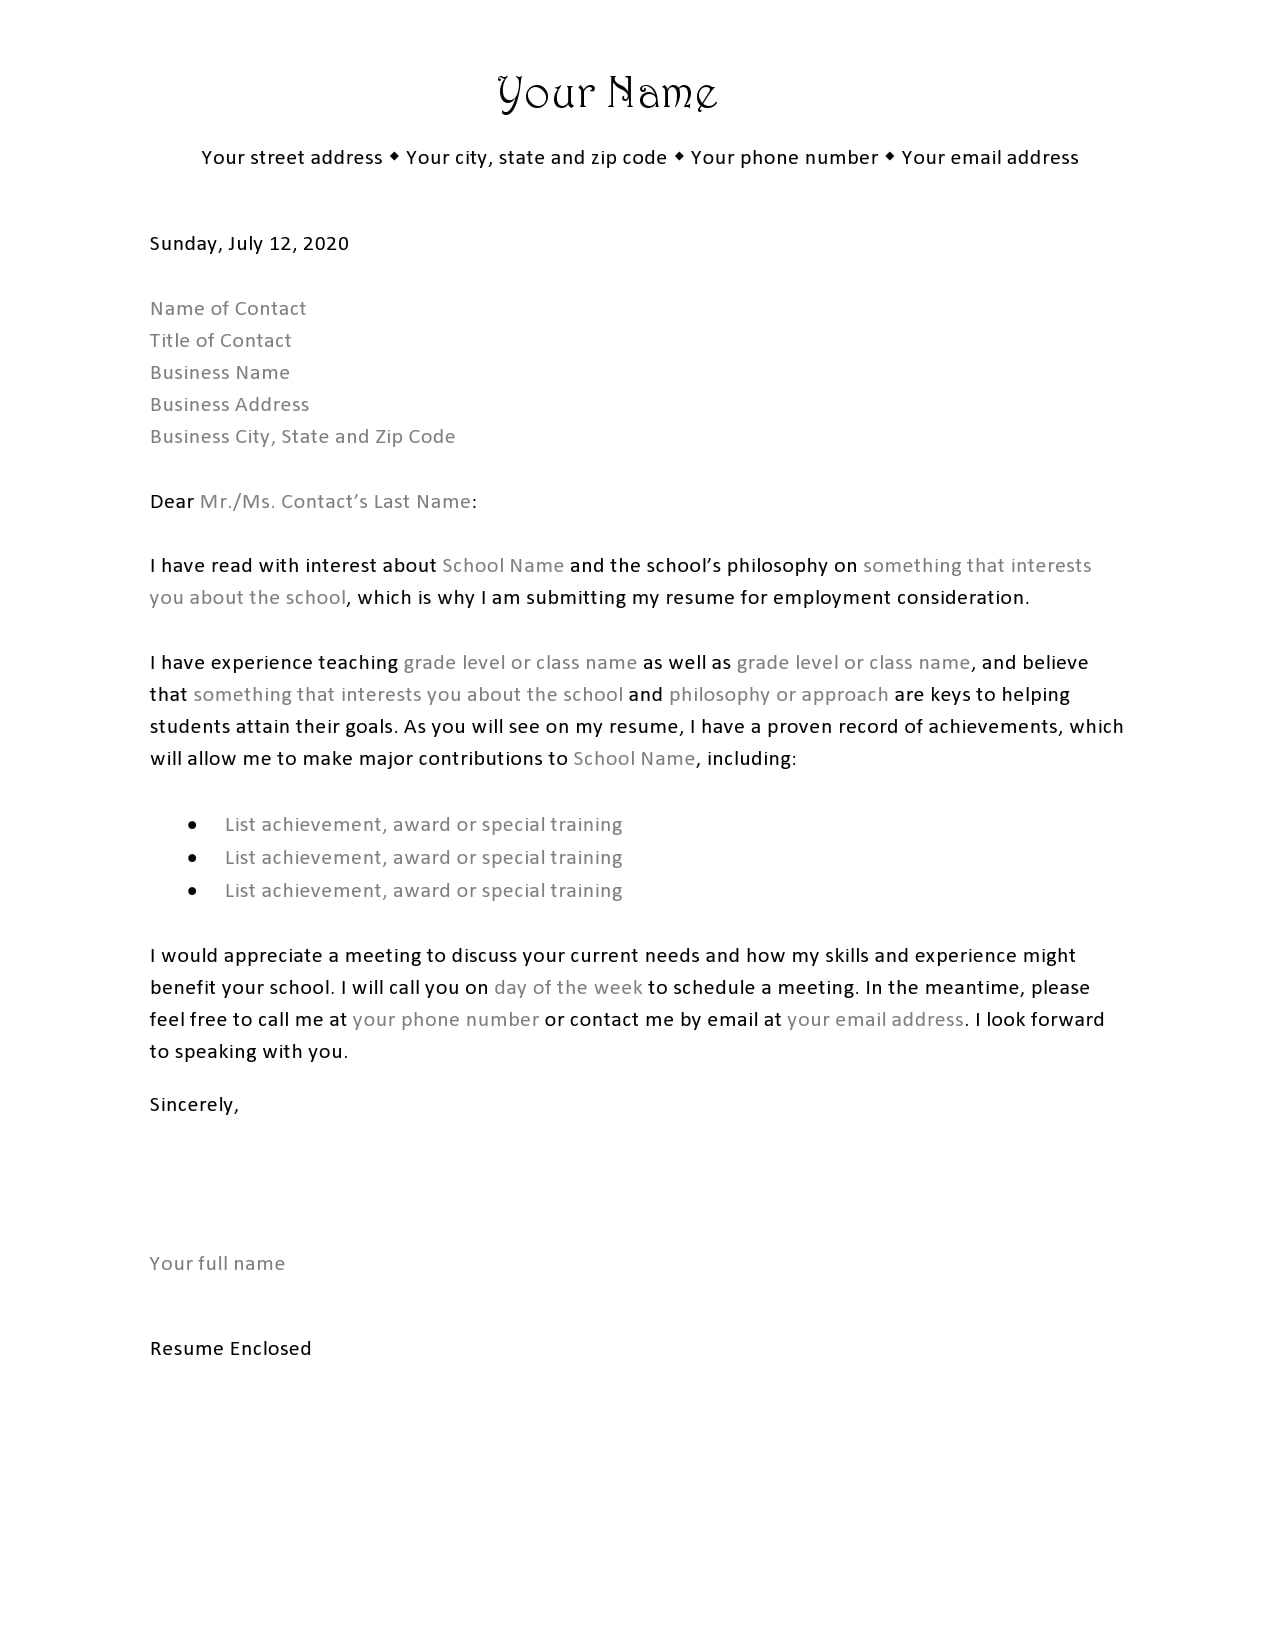 20 Editable Letter of Interest for a Job Templates - TemplateArchive Inside Letter Of Interest Template Microsoft Word